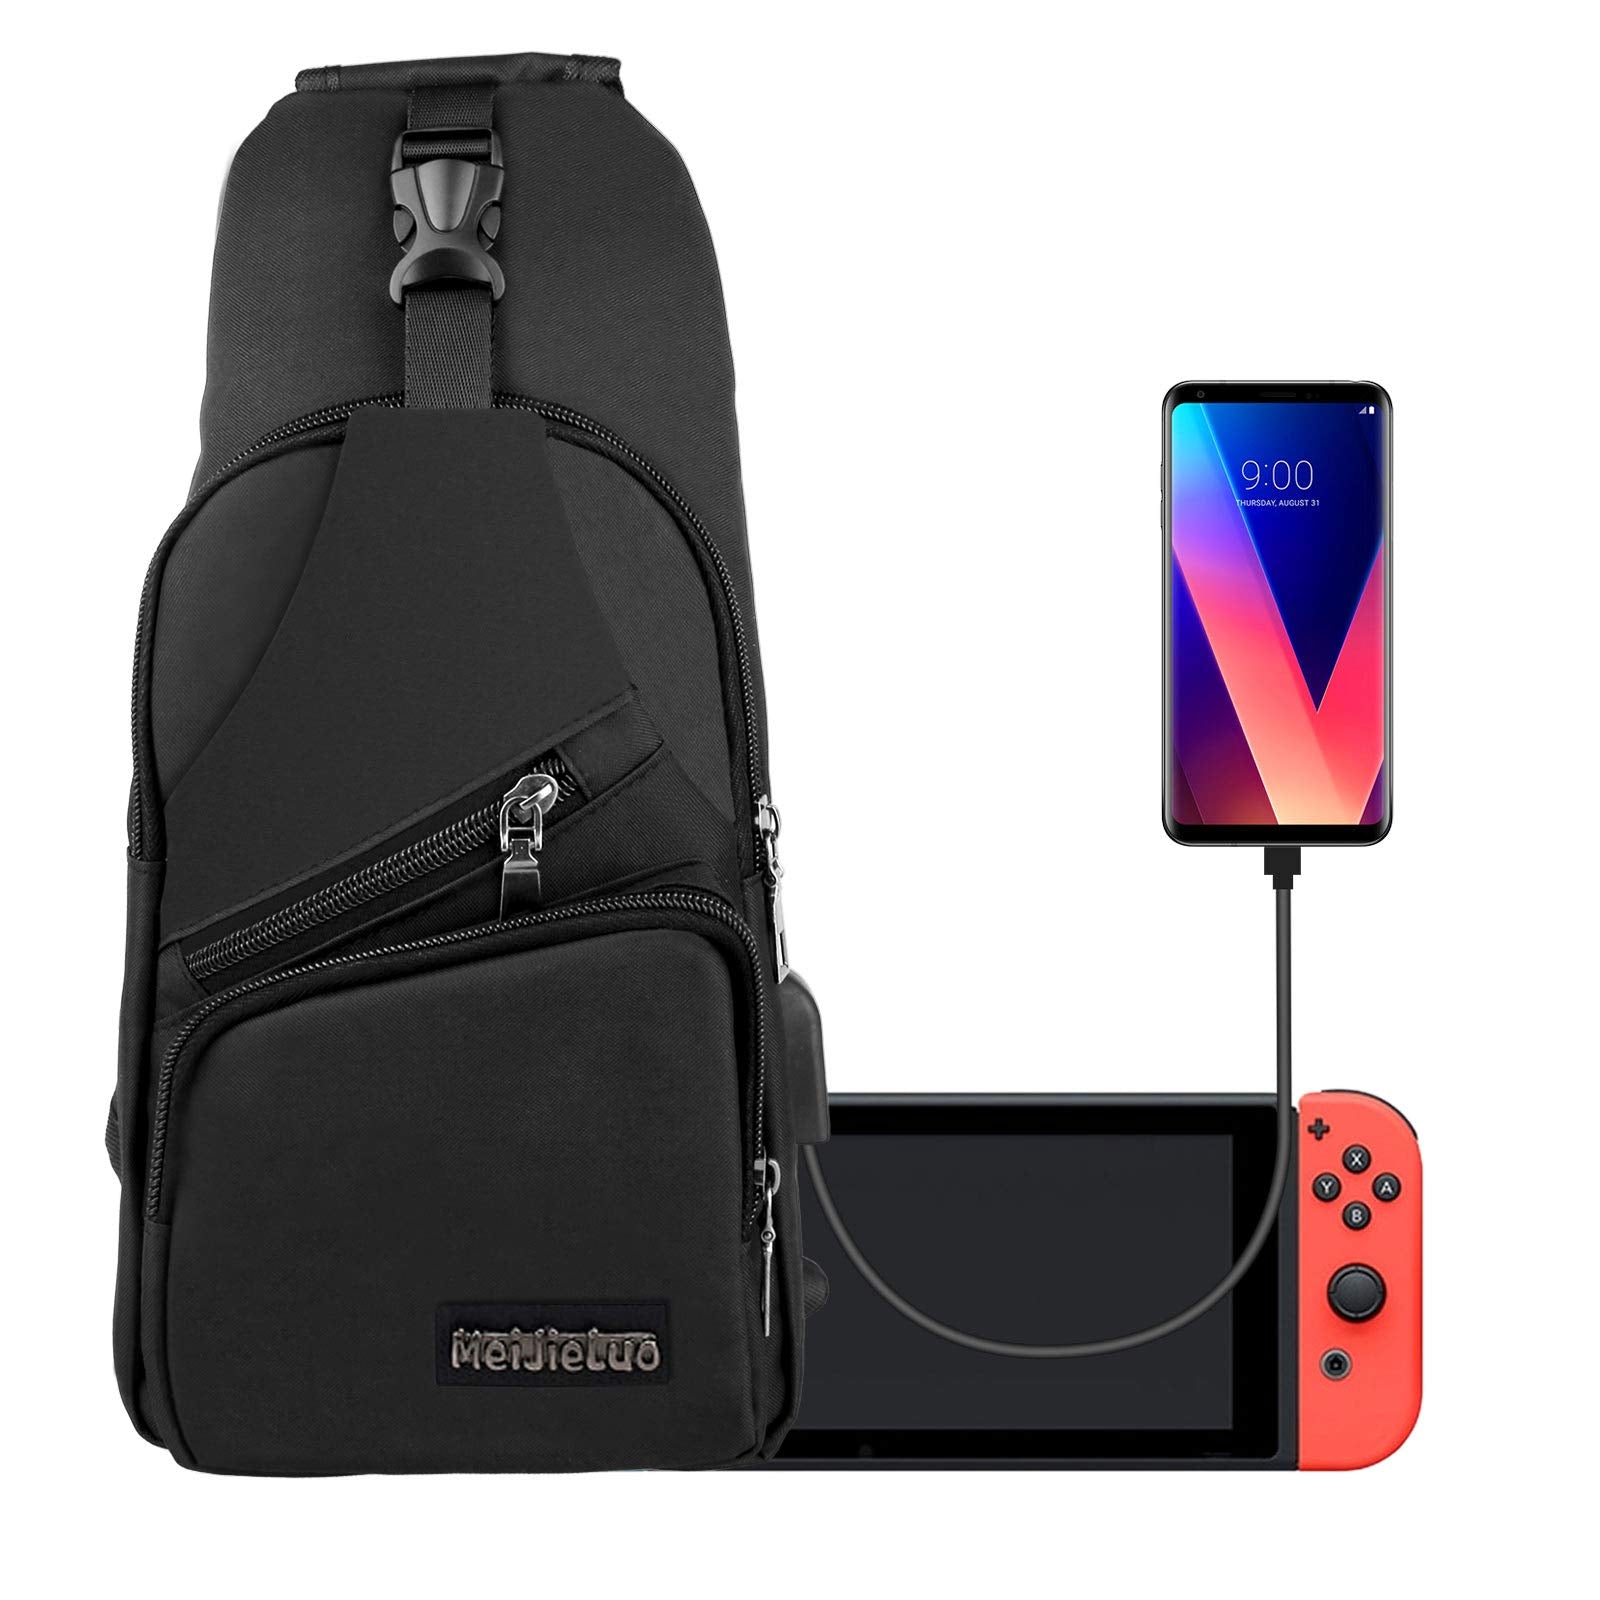 EEEKit Sling Backpack, Small Black Sling Crossbody Backpack Shoulder Bag for Men Women, Backpack Crossbody Travel Bag Joy-Cons and Accessories, Charge Your Phone Via Side USB Charging Interface